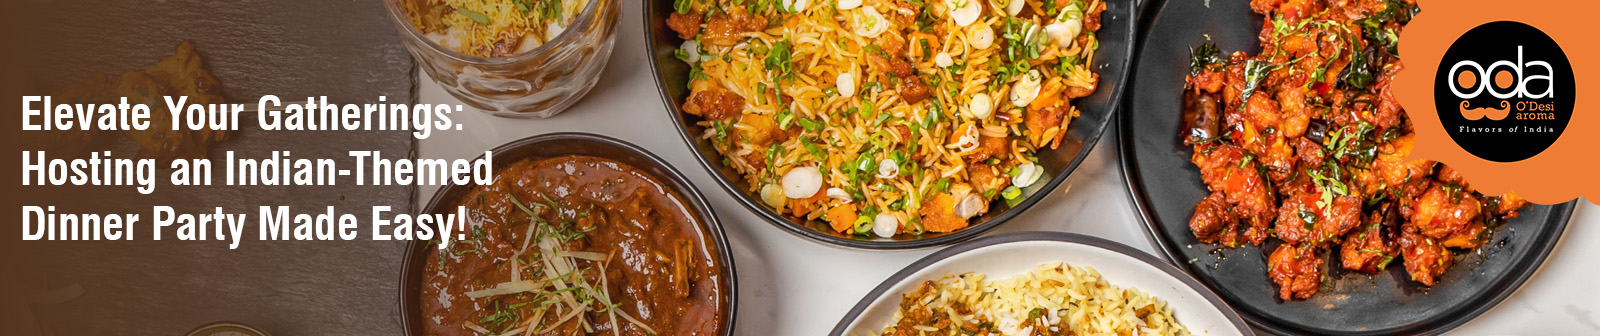 Elevate Your Gatherings Hosting an Indian Themed Dinner Party Made Easy Heading